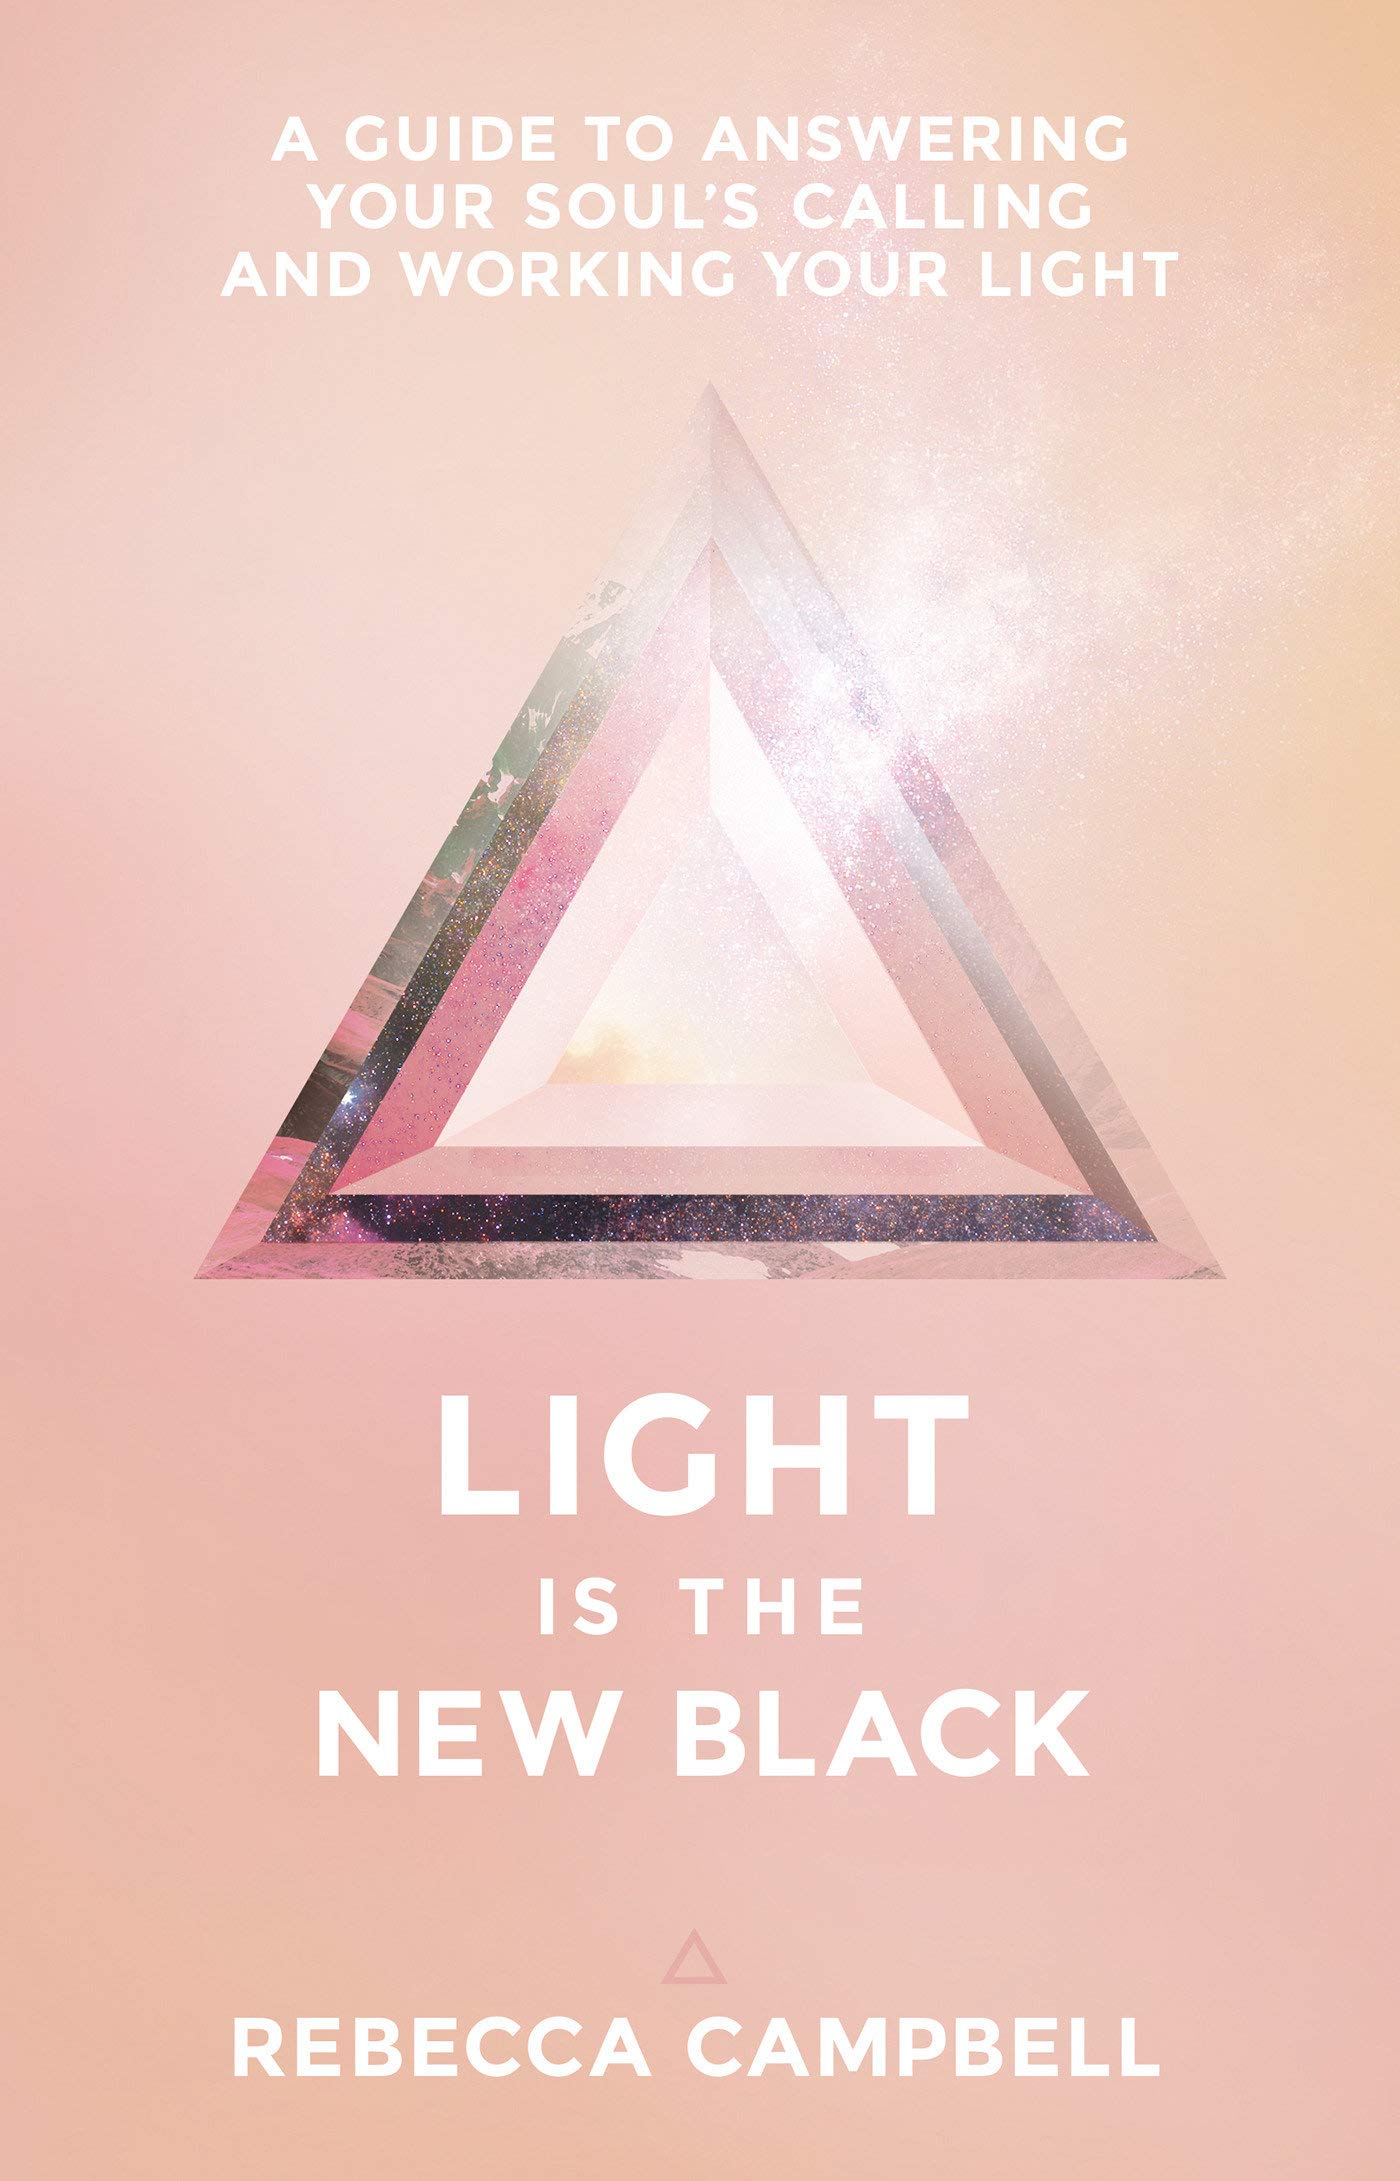 Light Is the New Black: A Guide to Answering Your Soul's Callings and Working Your Light (Copy) (Copy)